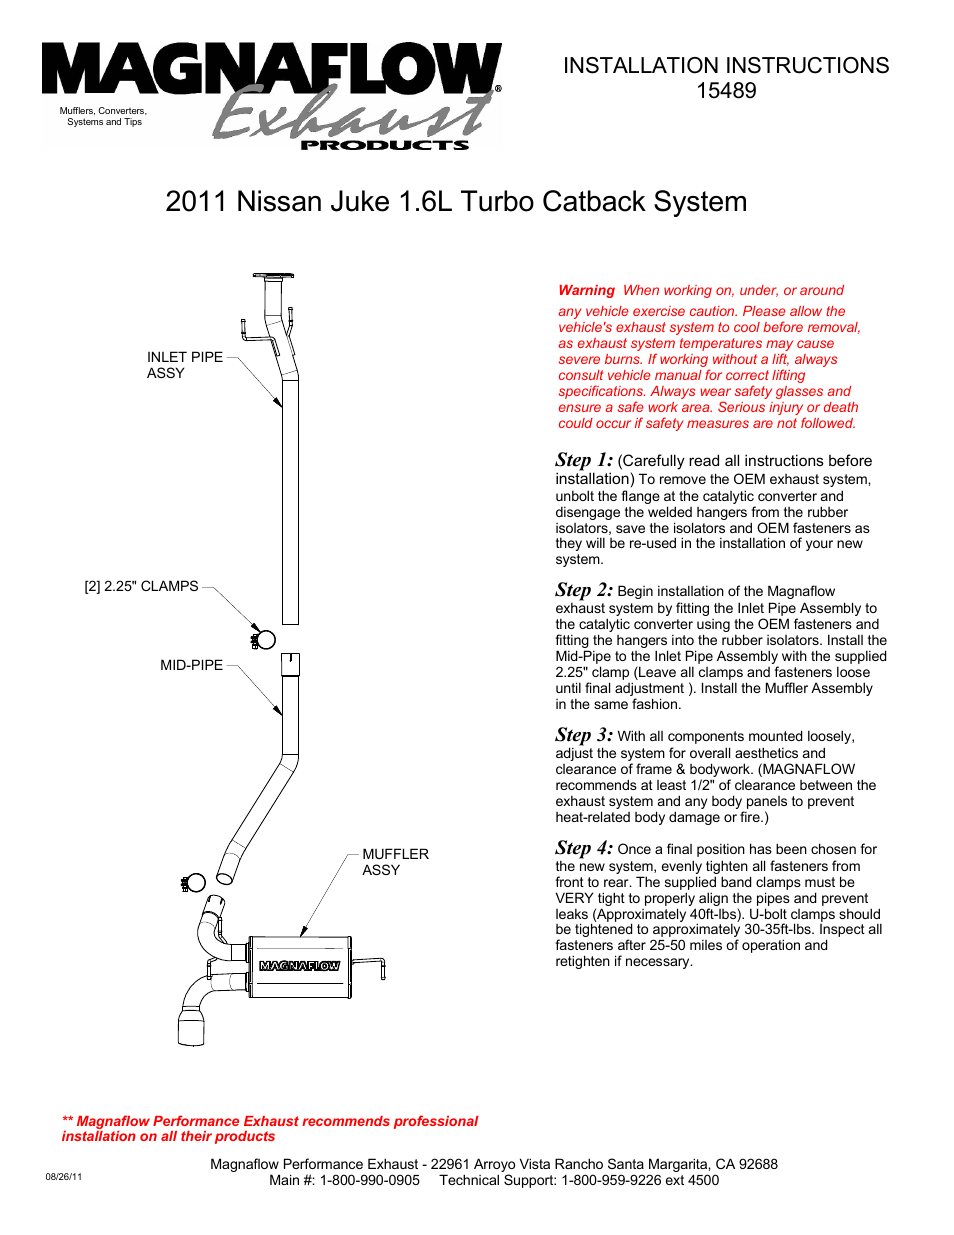 NISSAN TRUCK JUKE Stainless Cat-Back System PERFORMANCE EXHAUST